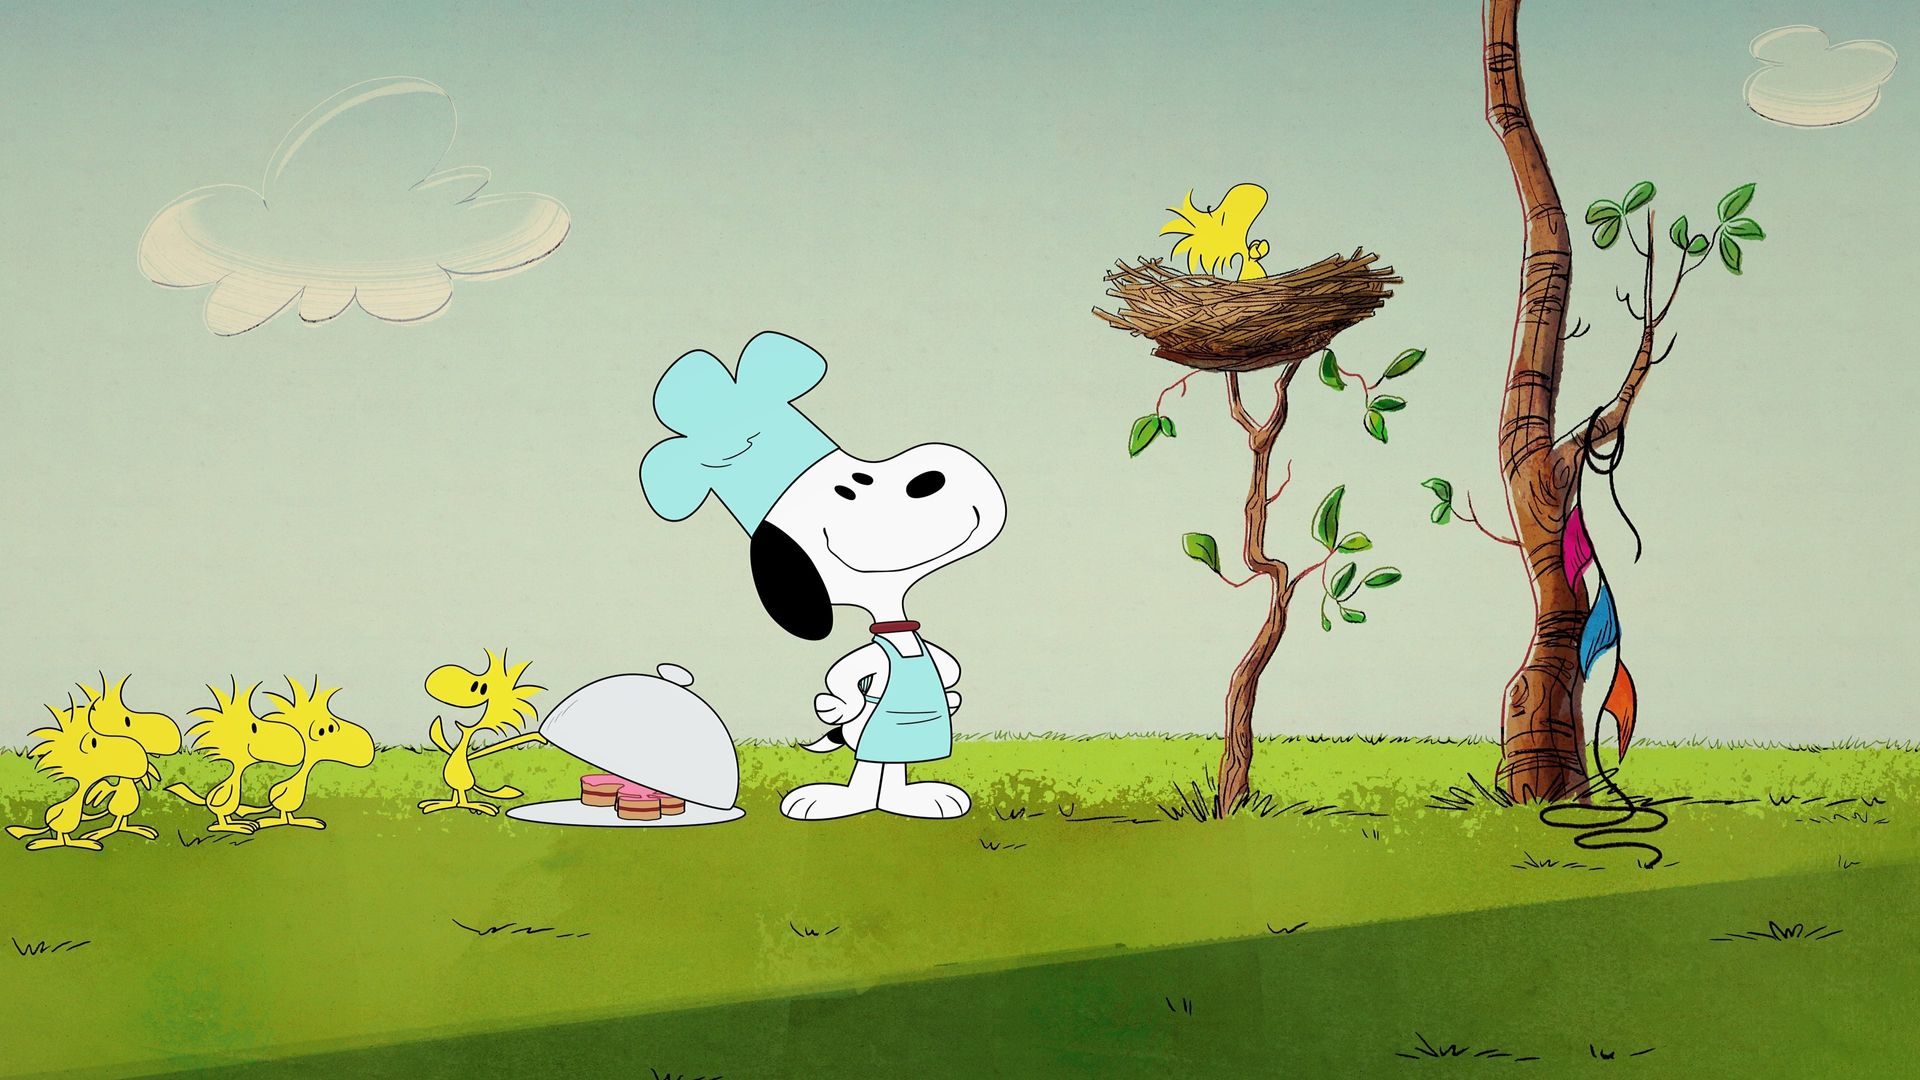 The Snoopy Show background